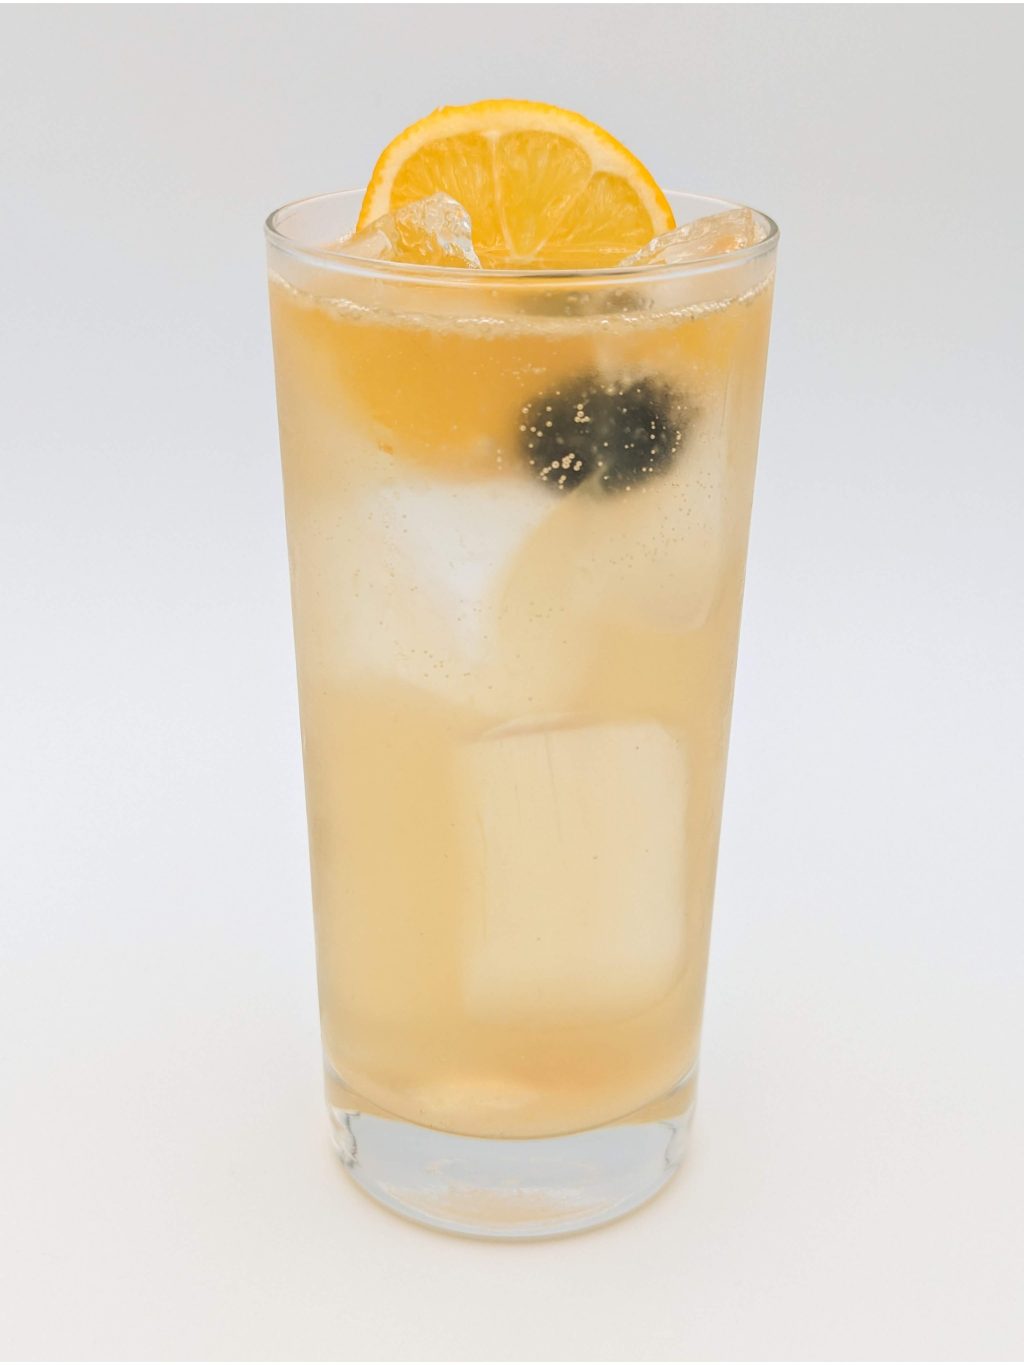 yellow liquid in a tall glass with ice and a lemon slice and cherry garnish